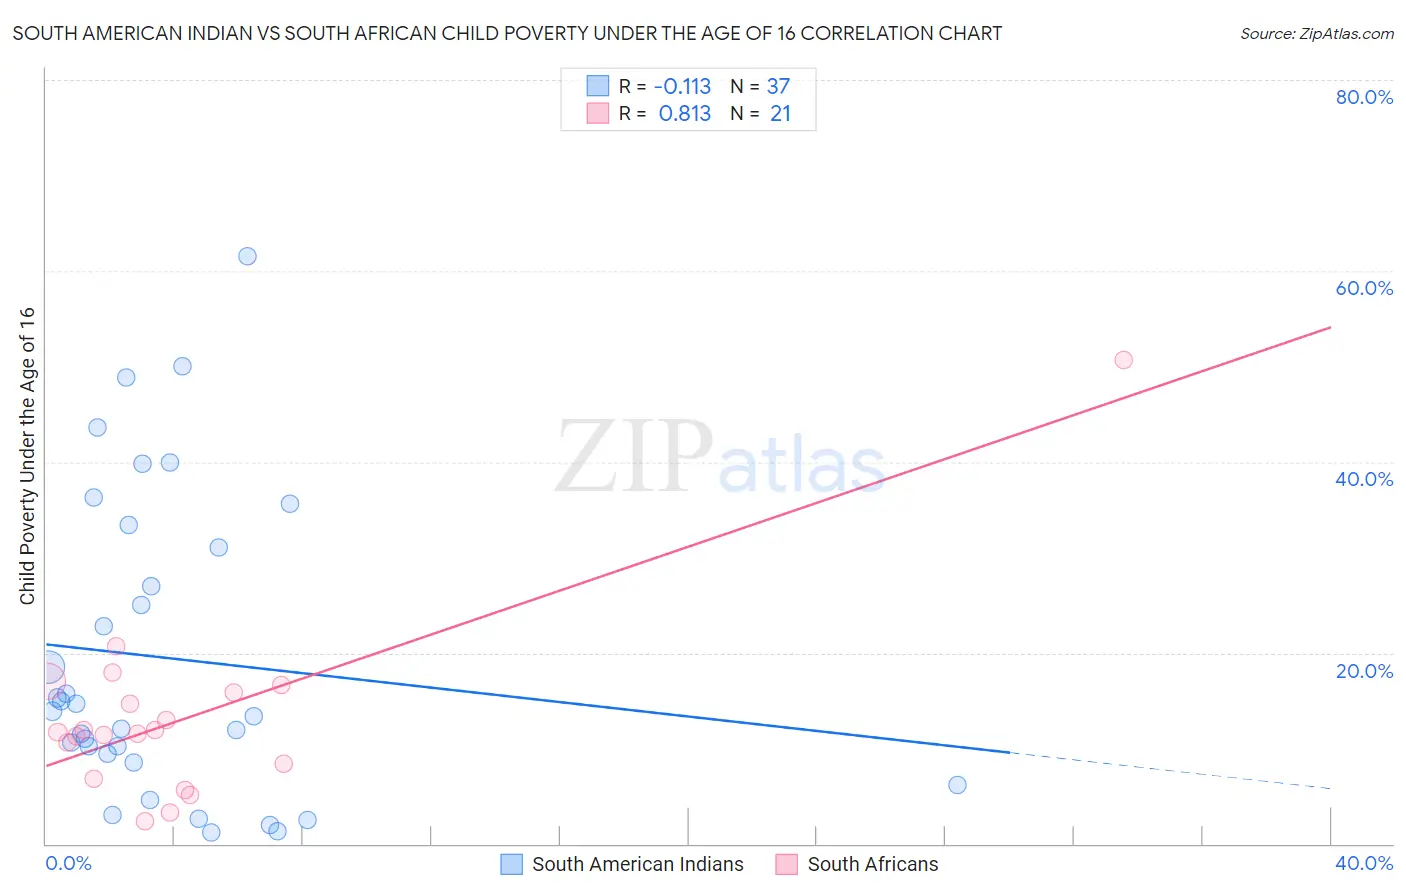 South American Indian vs South African Child Poverty Under the Age of 16